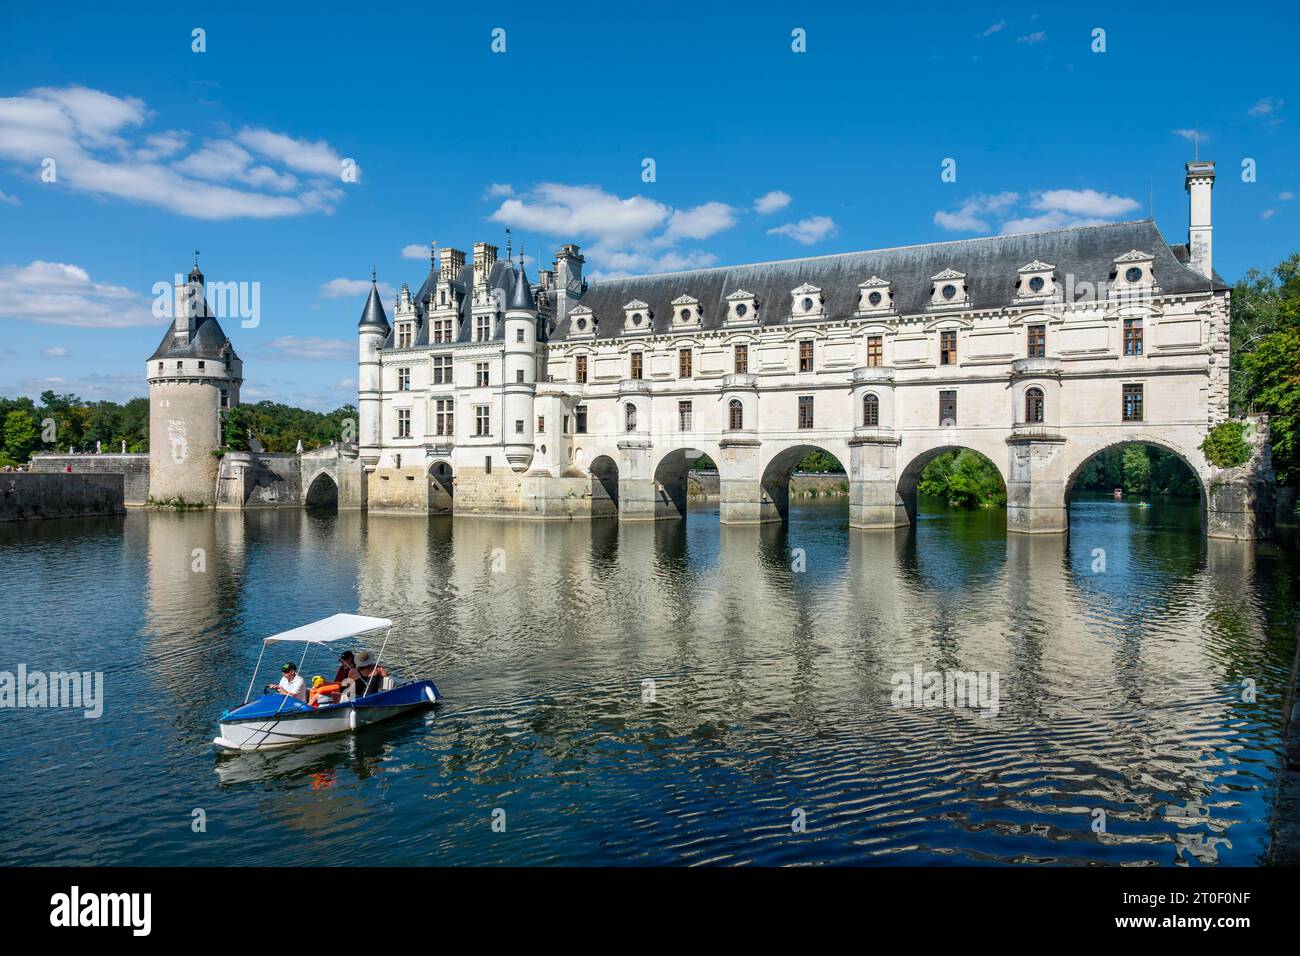 Chenonceau Castle is a moated castle. Its main building has stood on the northern bank of the Cher since 1522, while the gallery, not completed until 1576, spans the river. Although Chenonceau stands on the Cher River, it is counted among the Loire castles. Stock Photo